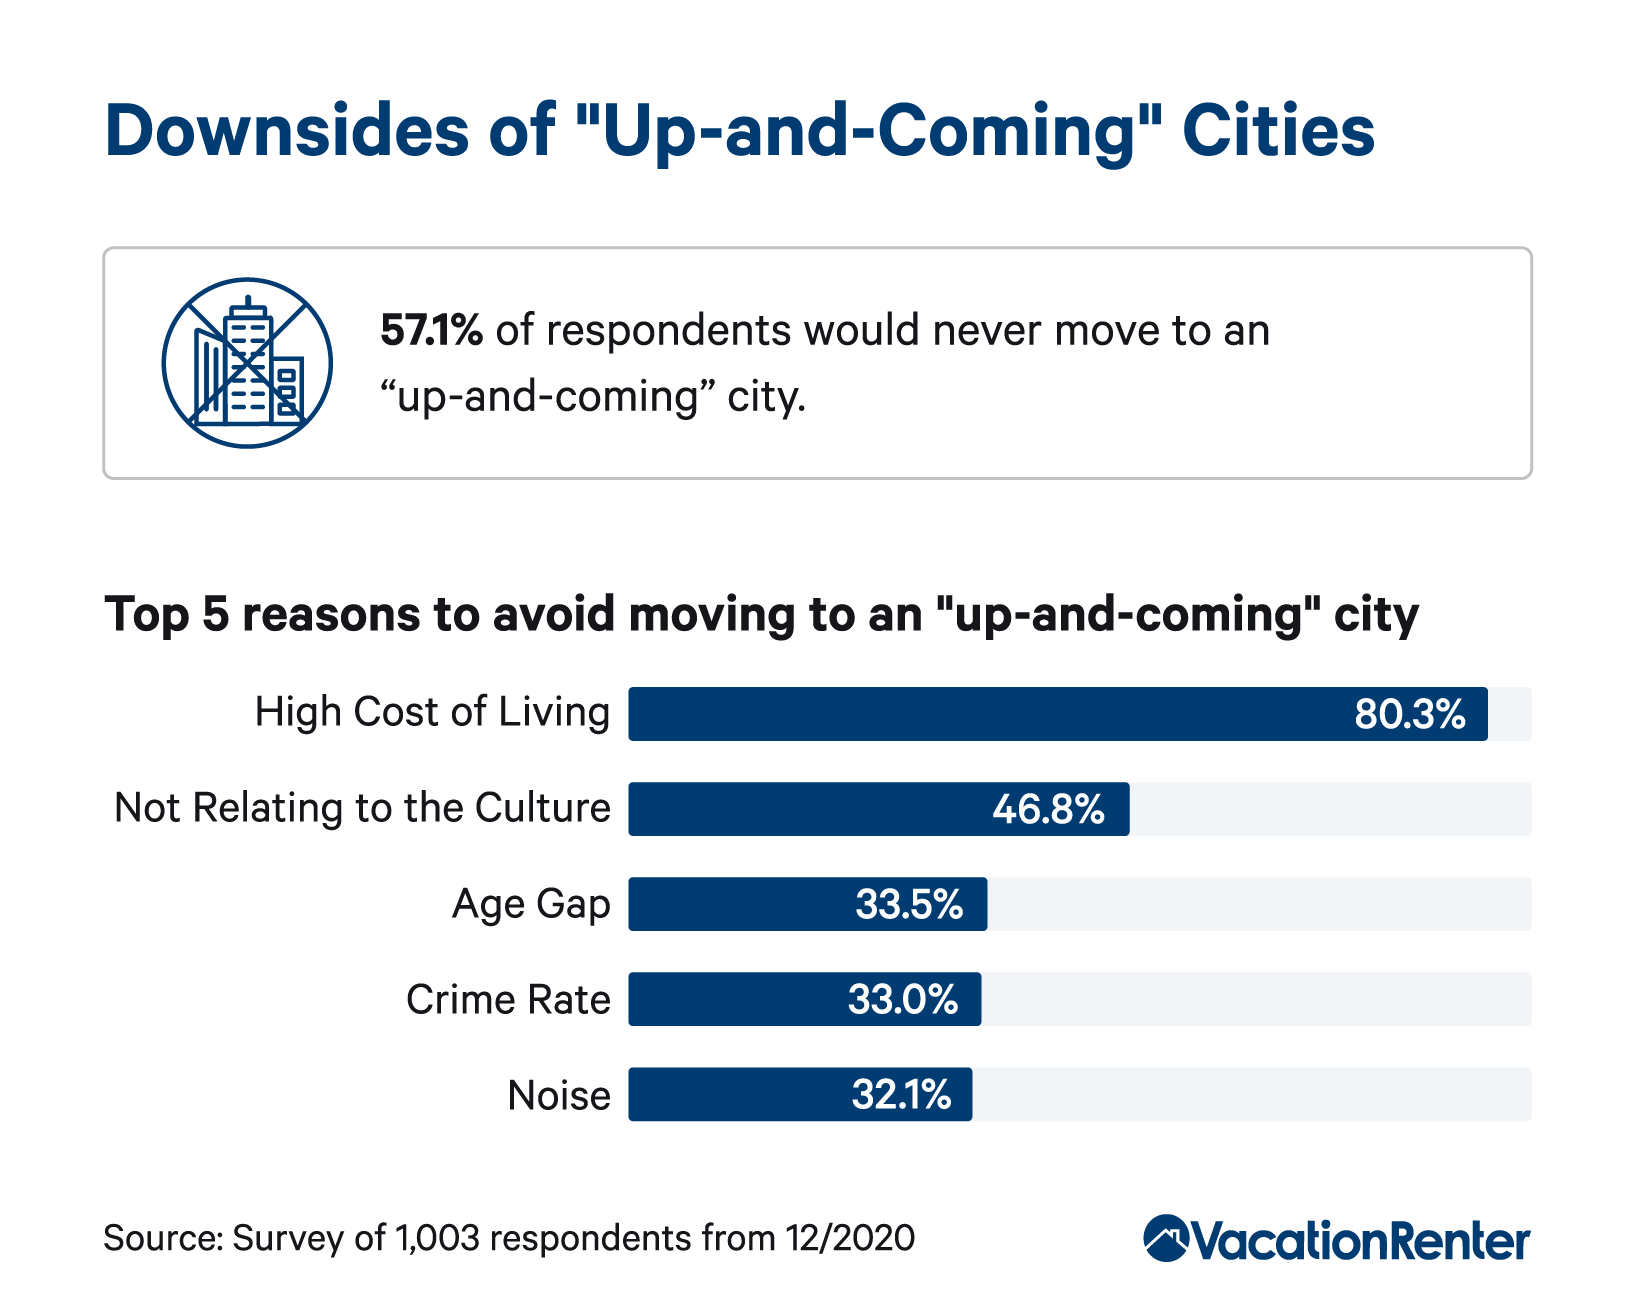 up-and-coming-cities-downsides